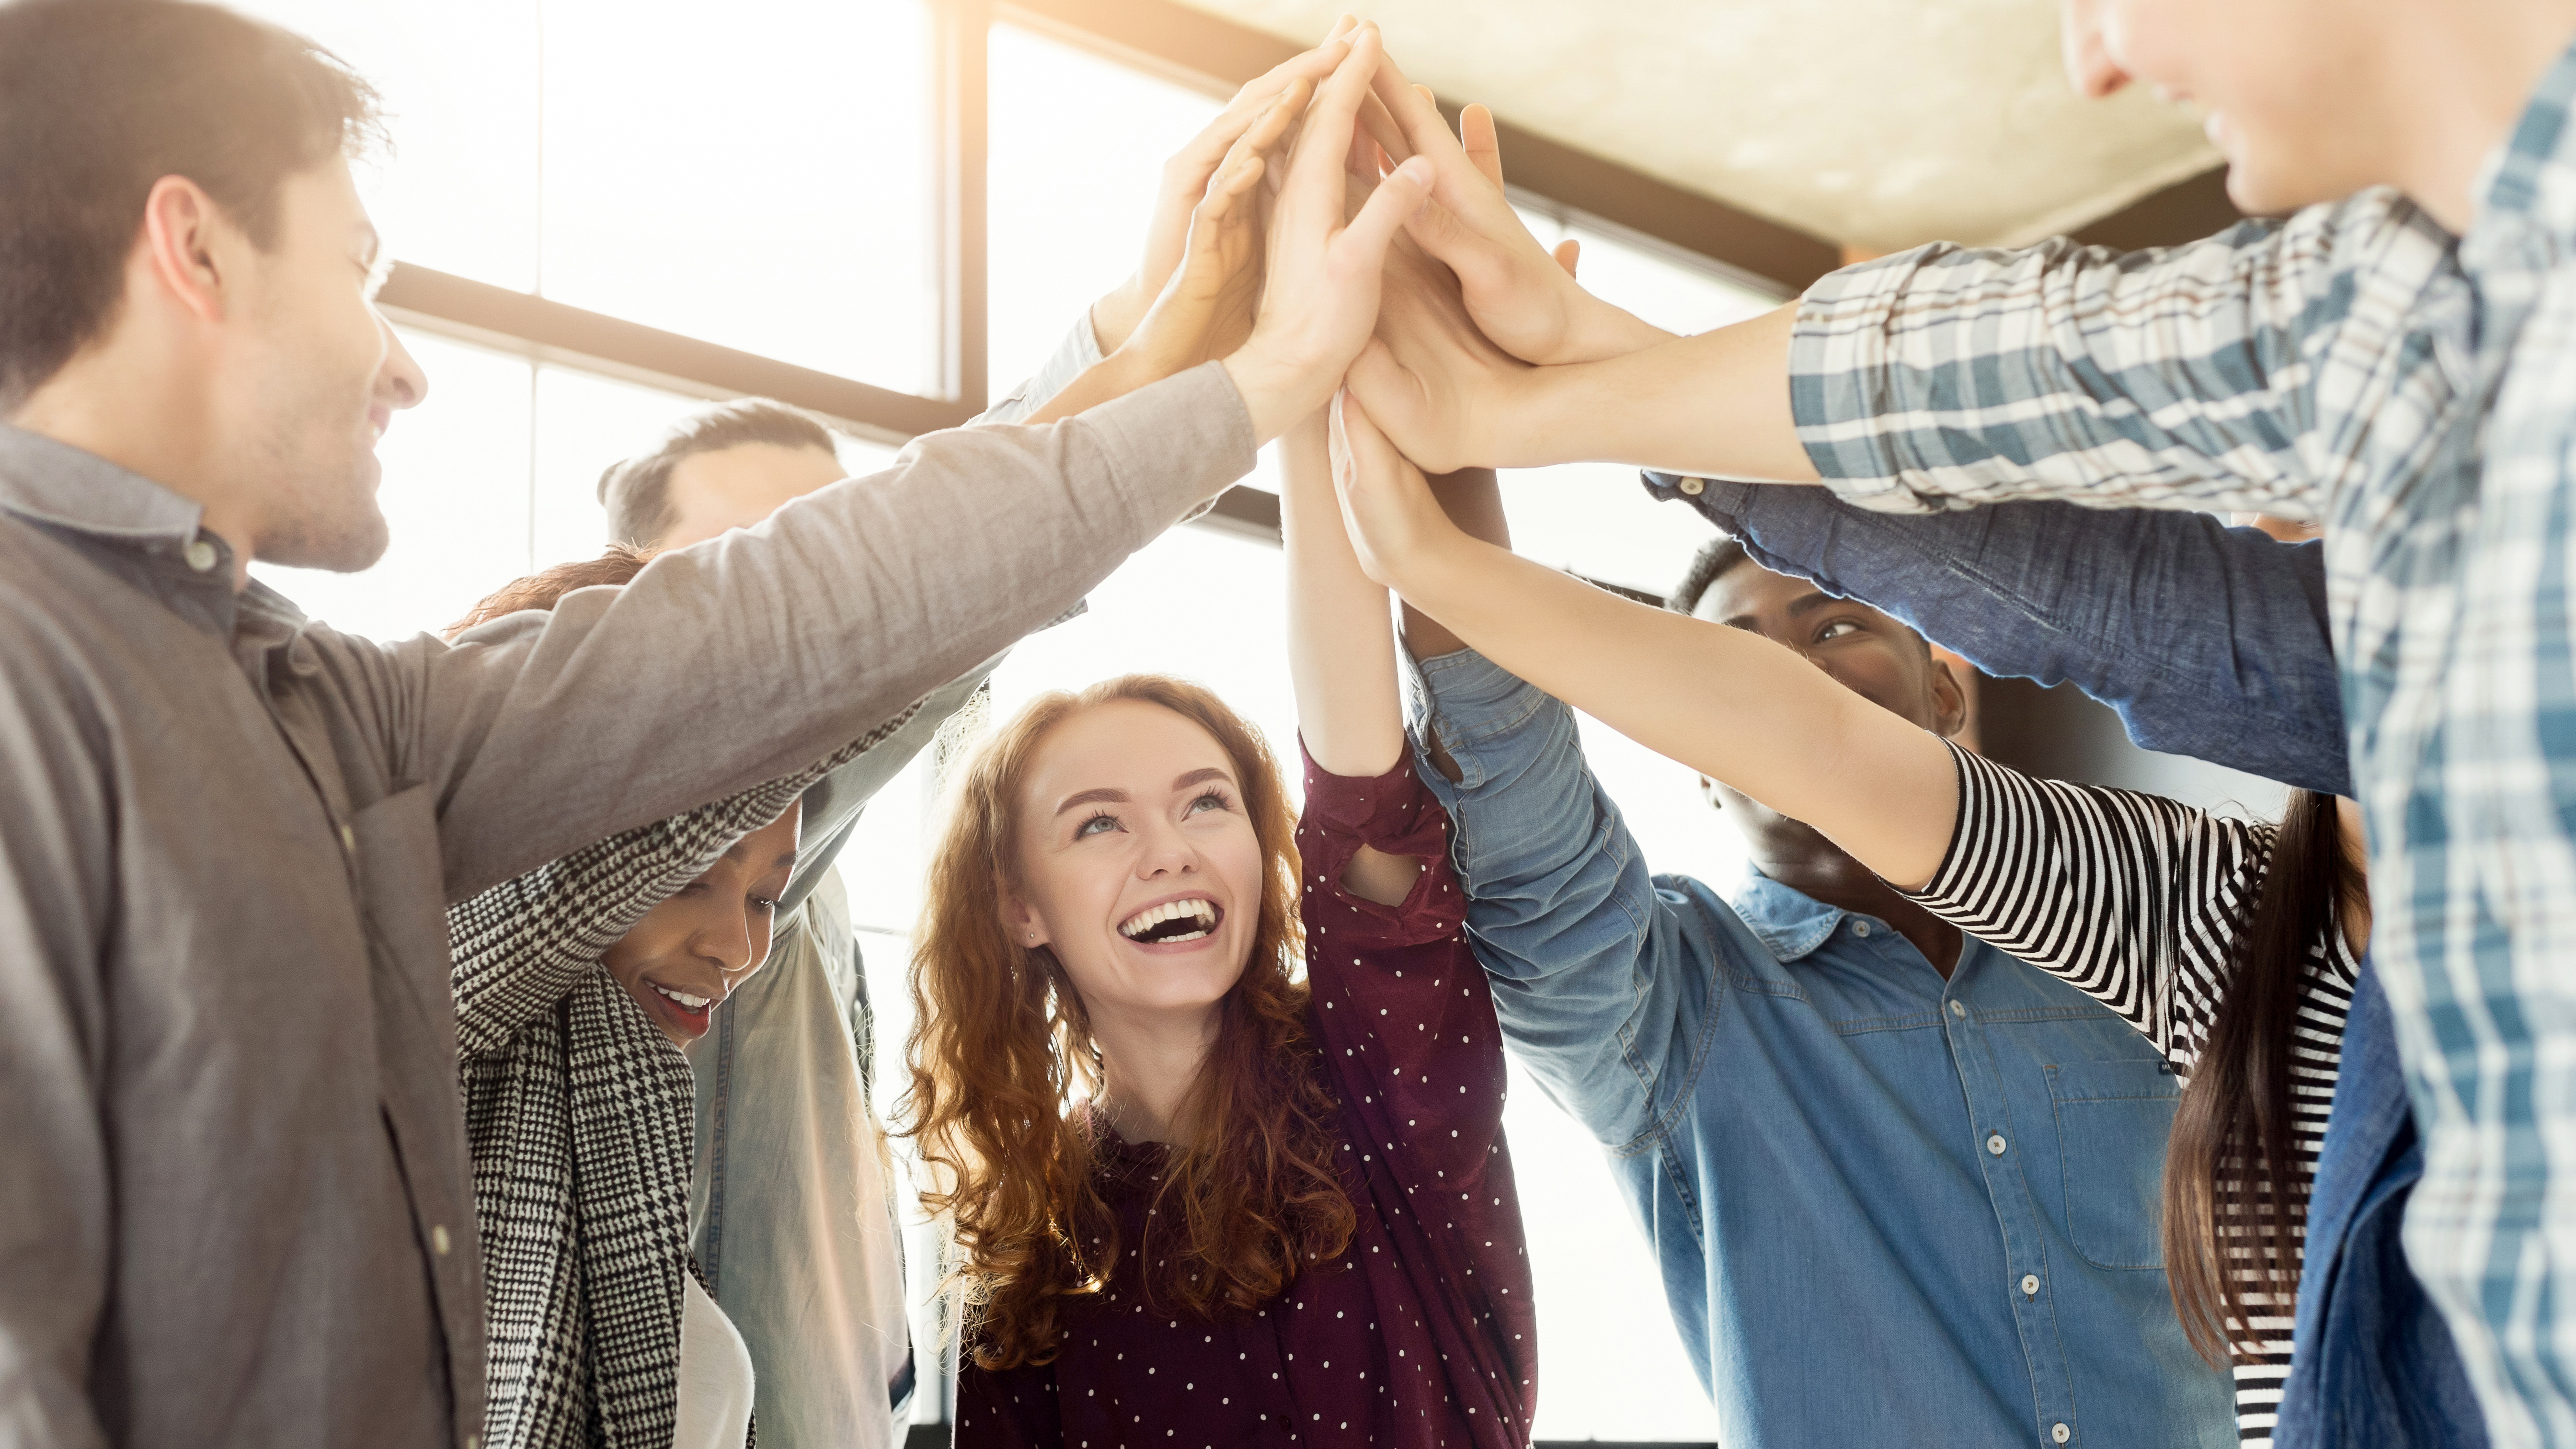 8 tips for building a cohesive team
